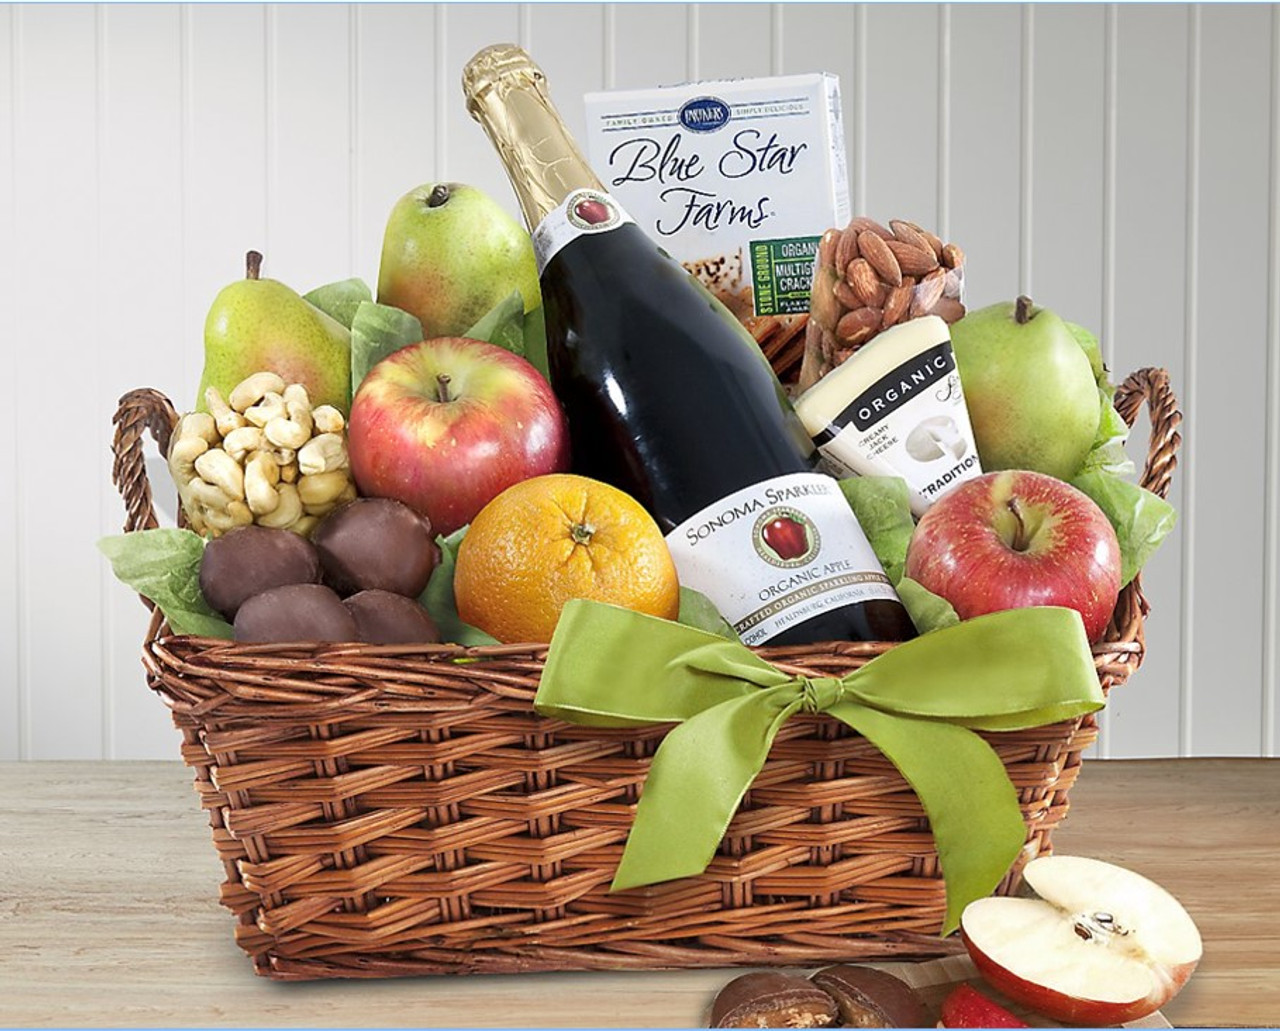 https://cdn11.bigcommerce.com/s-vs4etb4vhg/images/stencil/1280x1280/products/1118/1591/Organic_Cider_Fruit_and_Cheese_Gift_Basket__59079.1614826280.jpg?c=2